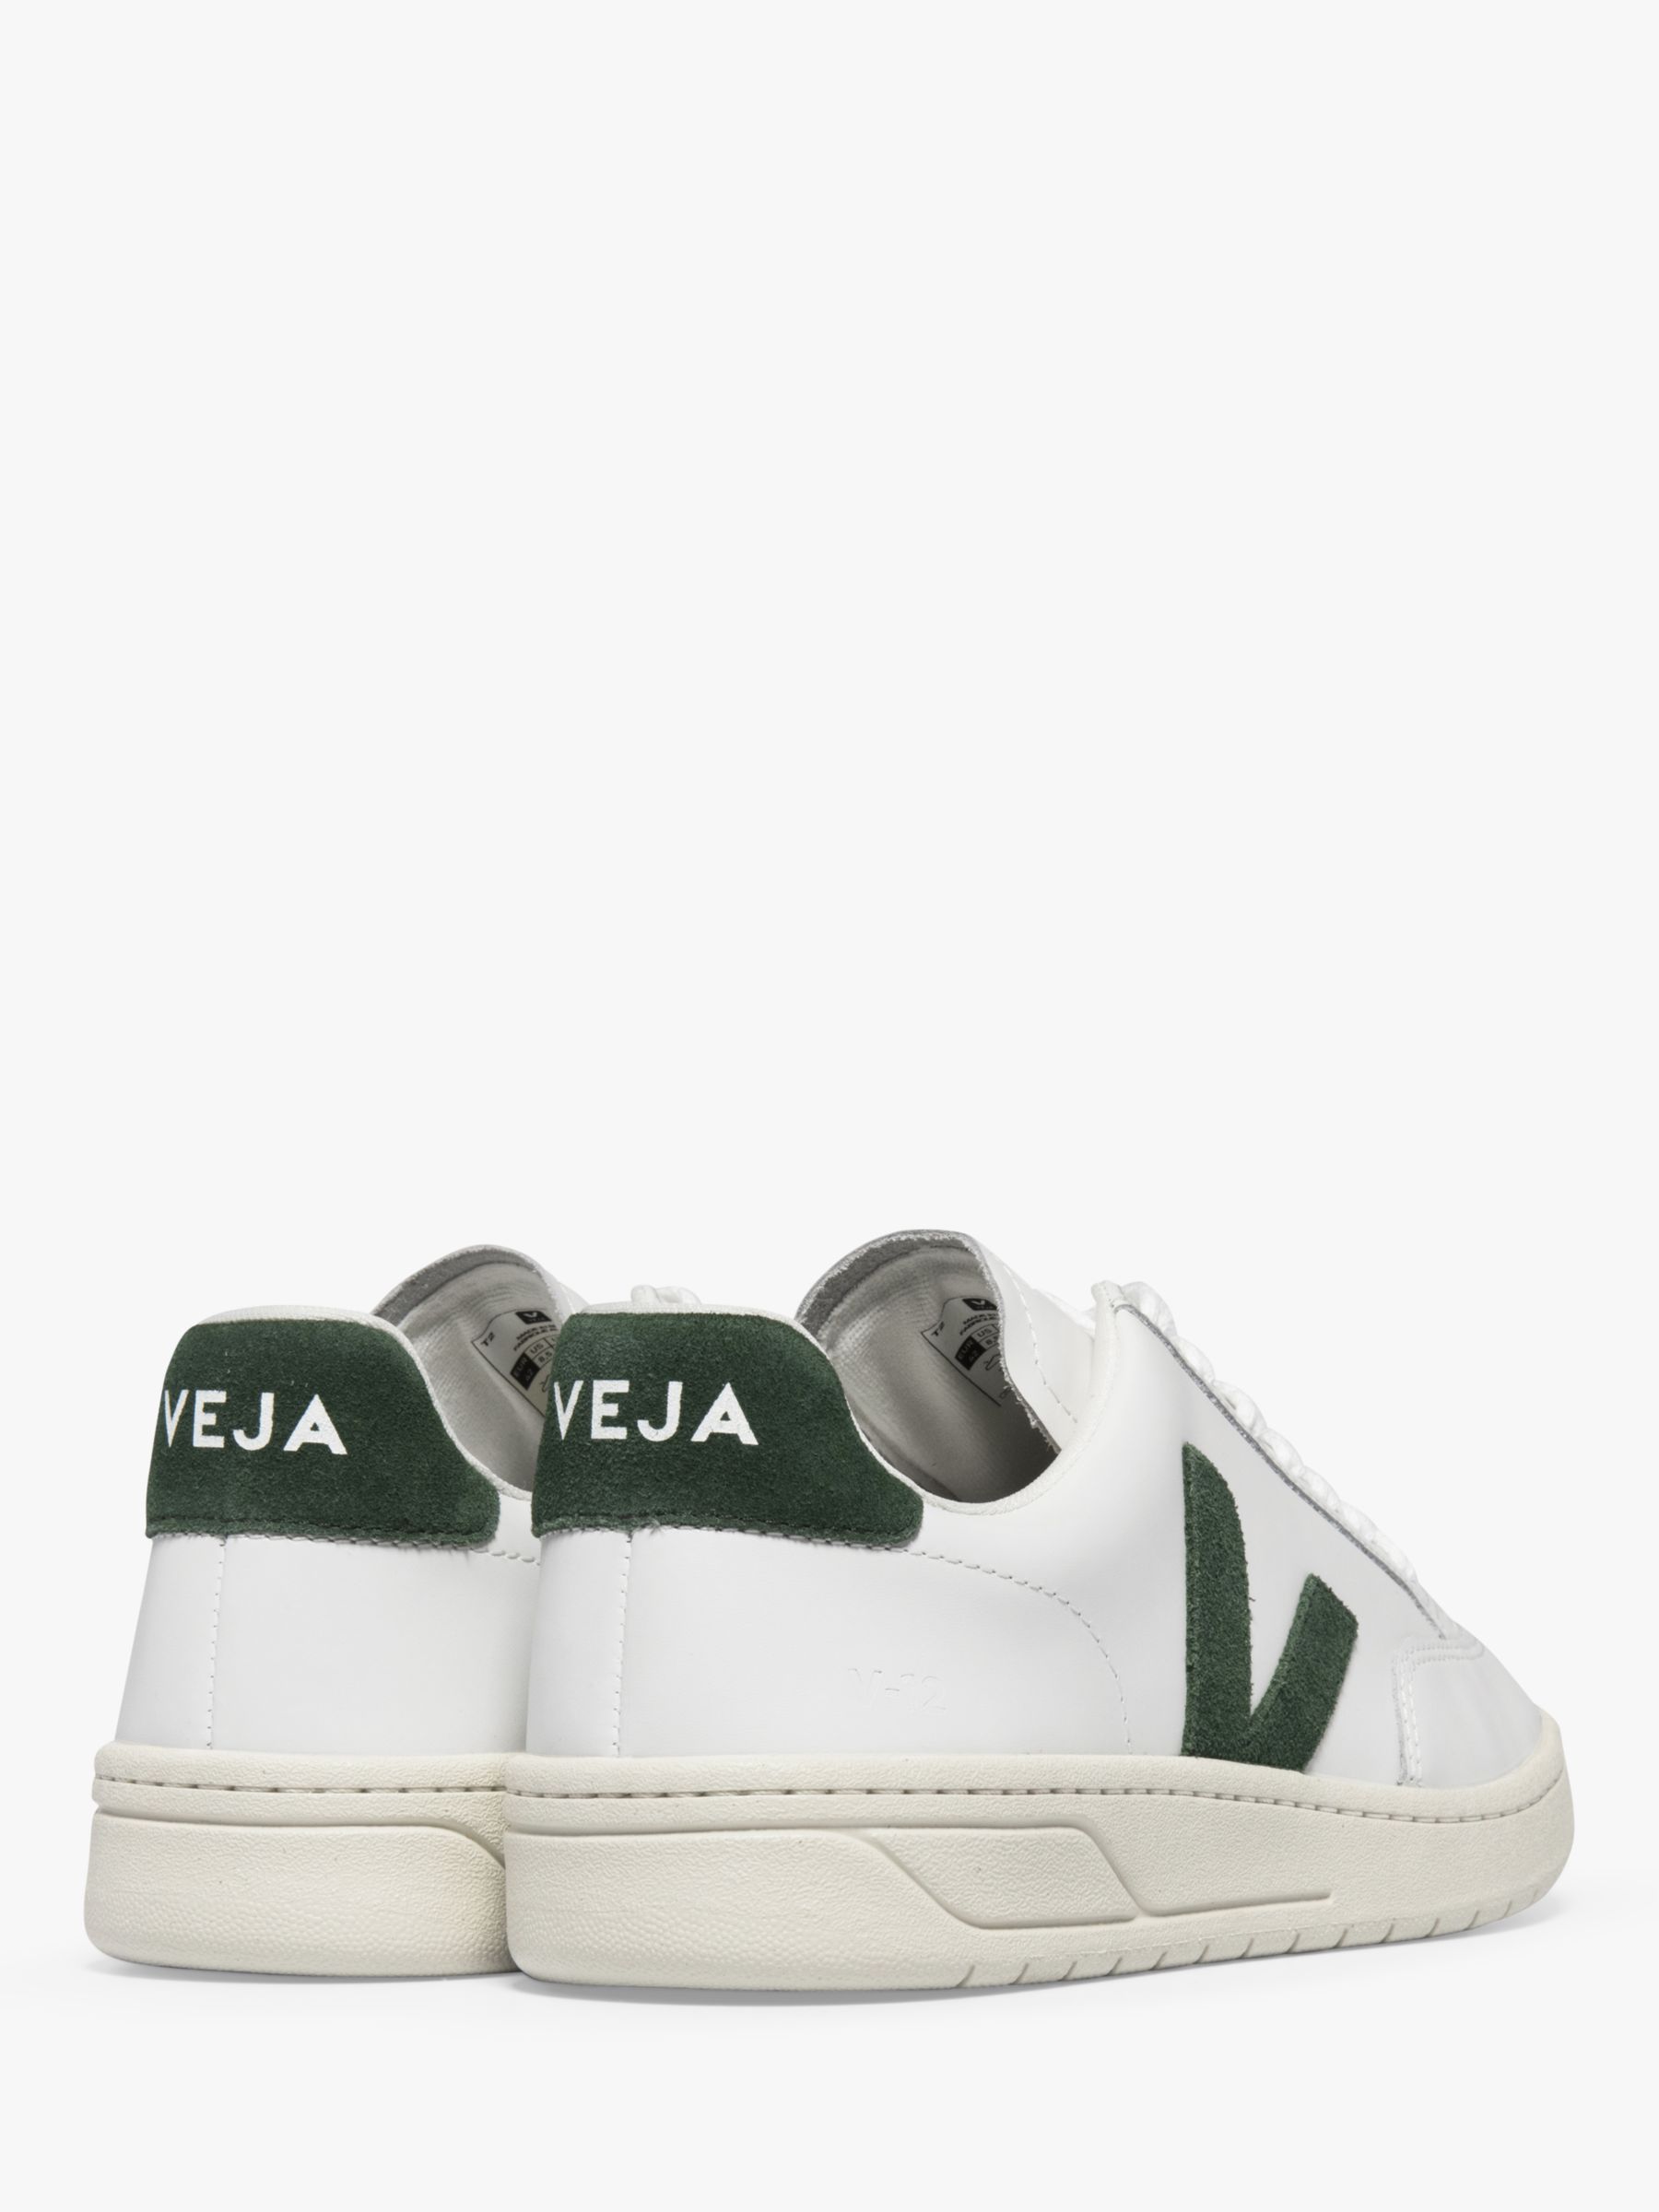 Buy VEJA V-12 Leather Trainers, Extra White/Cyprus Online at johnlewis.com